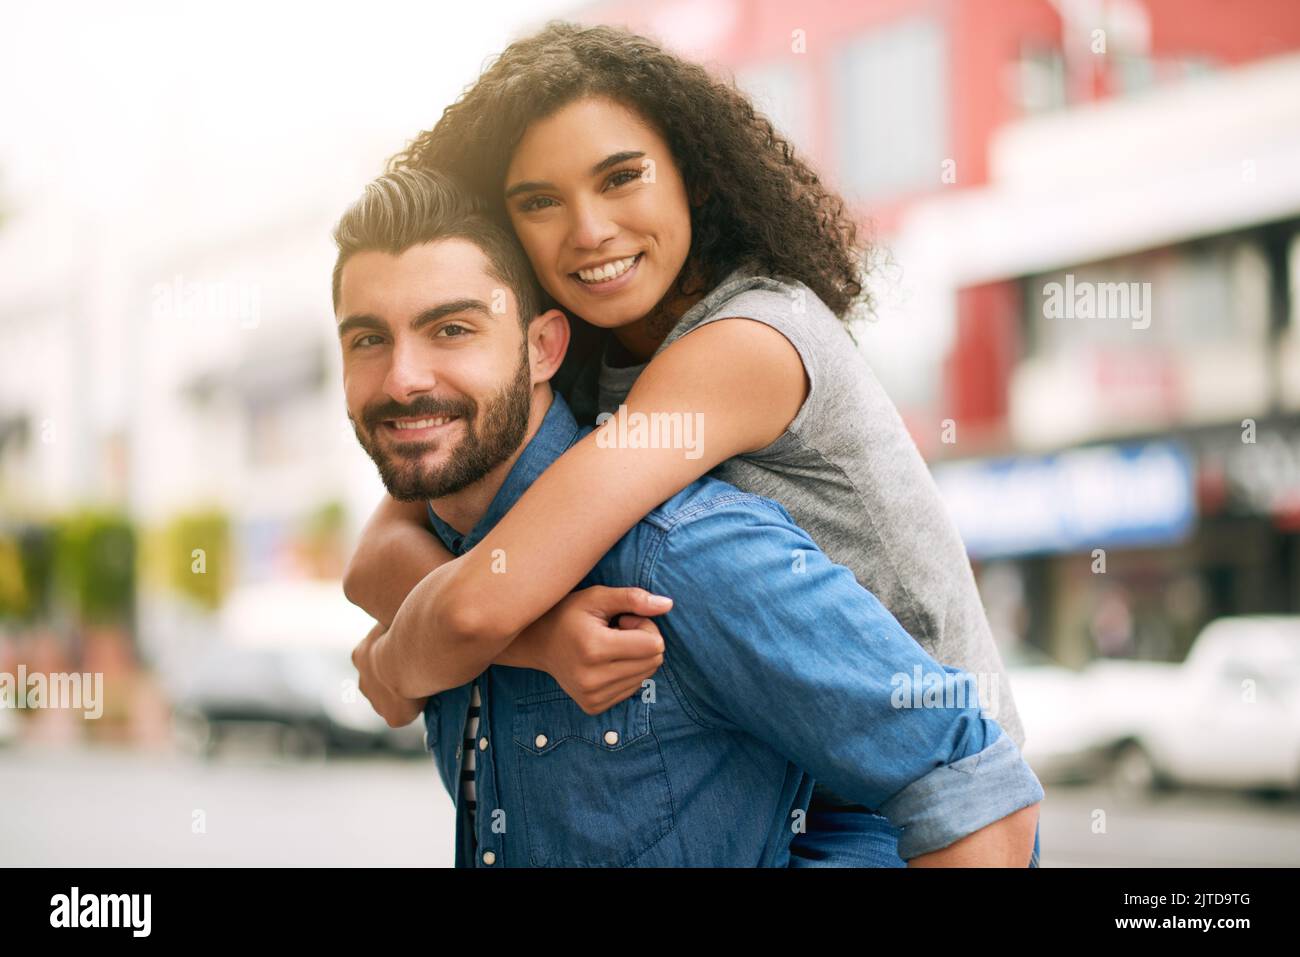 Hell do anything to make her happy. a playful couple out in the city together. Stock Photo